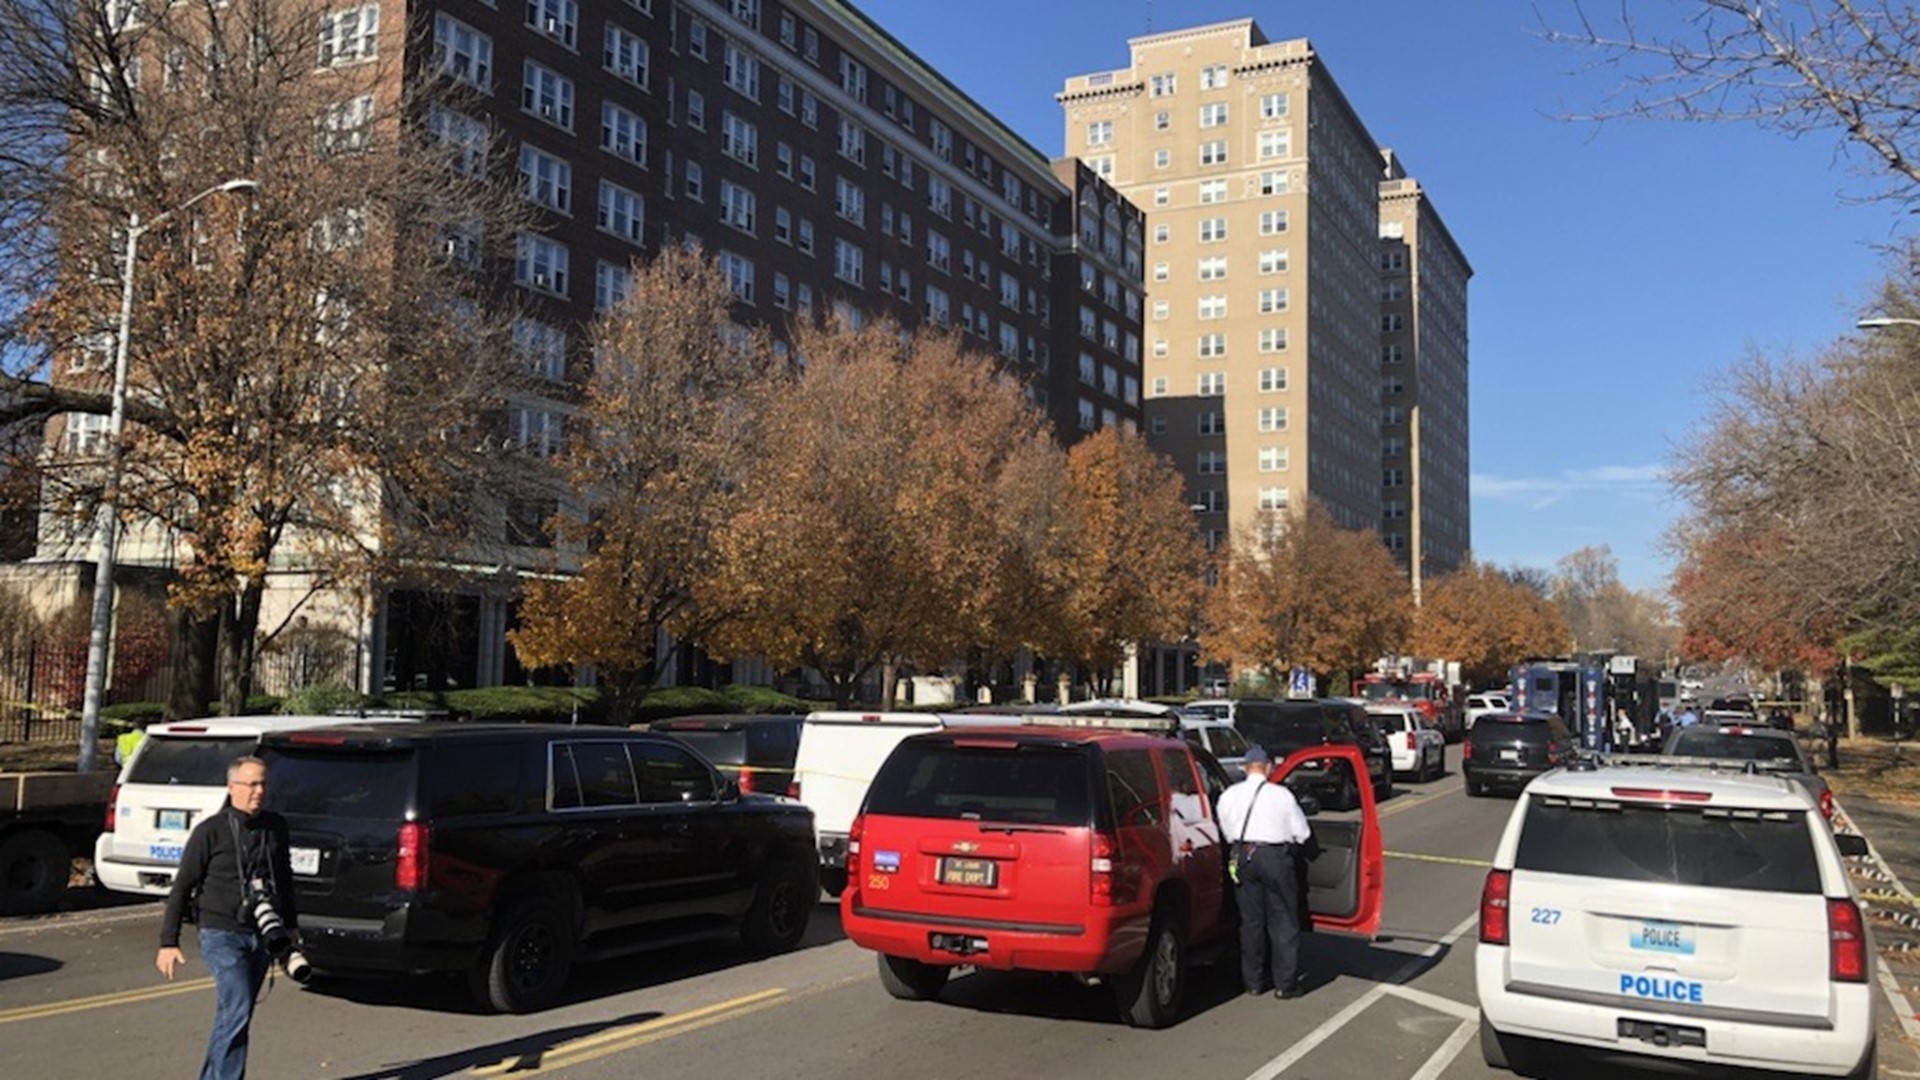 A man is dead after exchanging gunfire with police in a St. Louis apartment building. Police say he was found with two weapons.